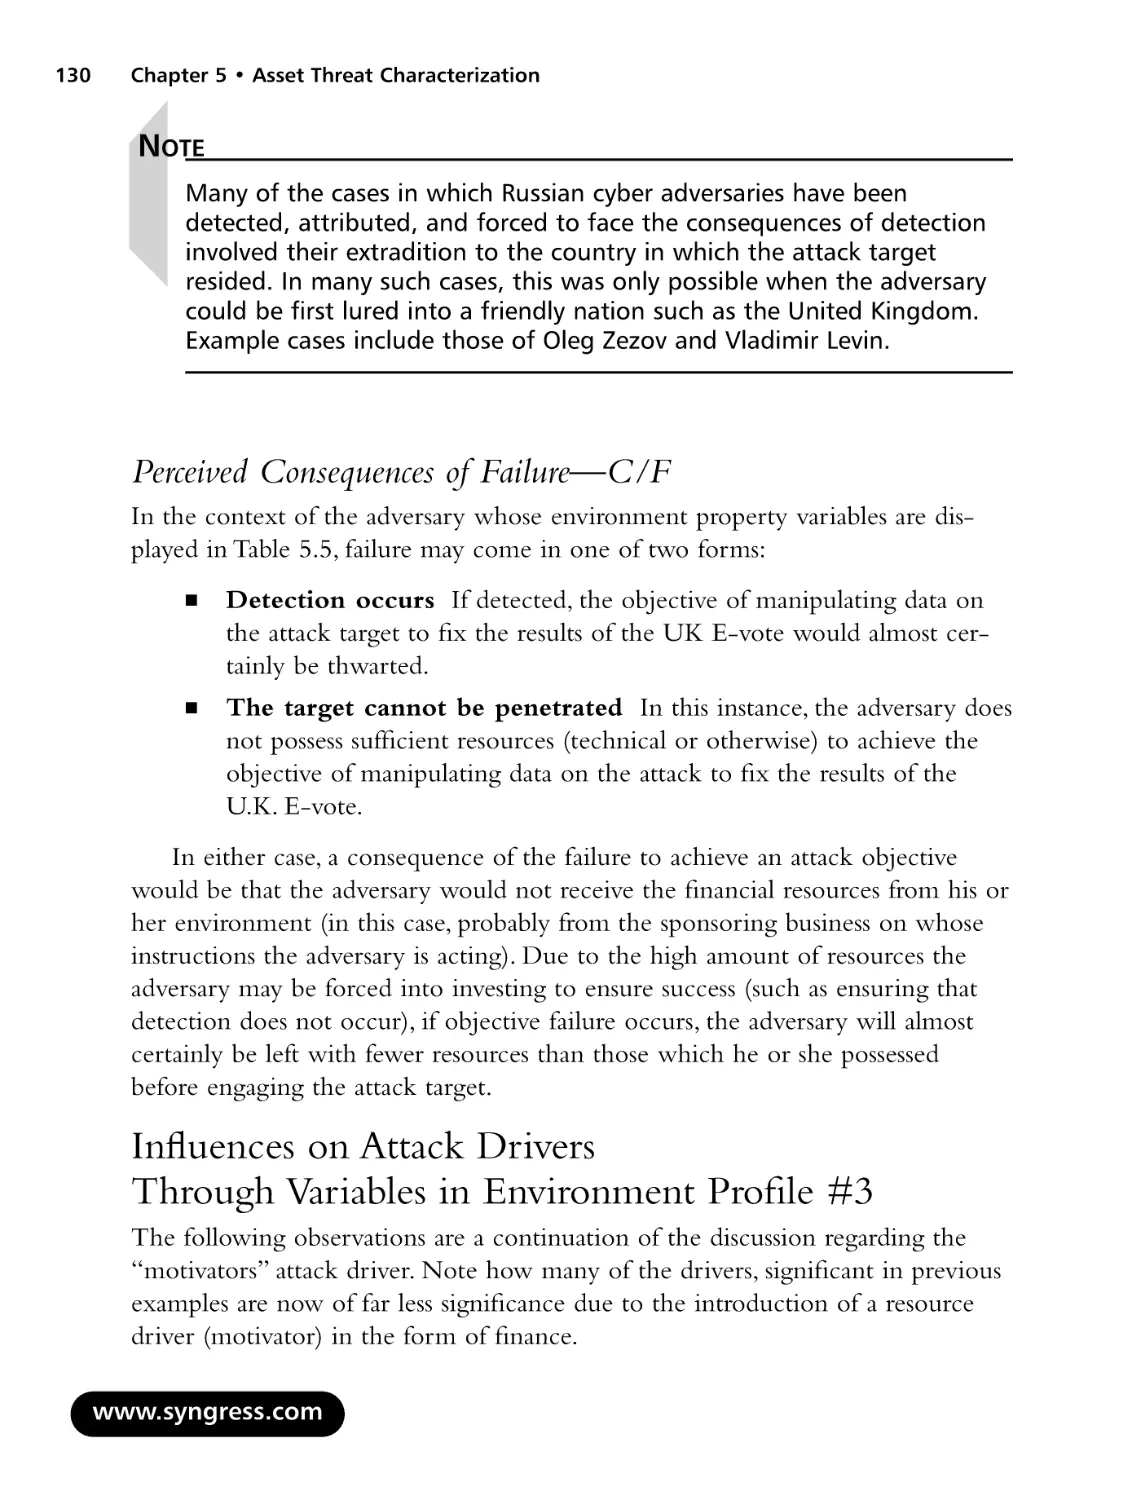 Influences on Attack Drivers Through Variables in Environment Profile #3